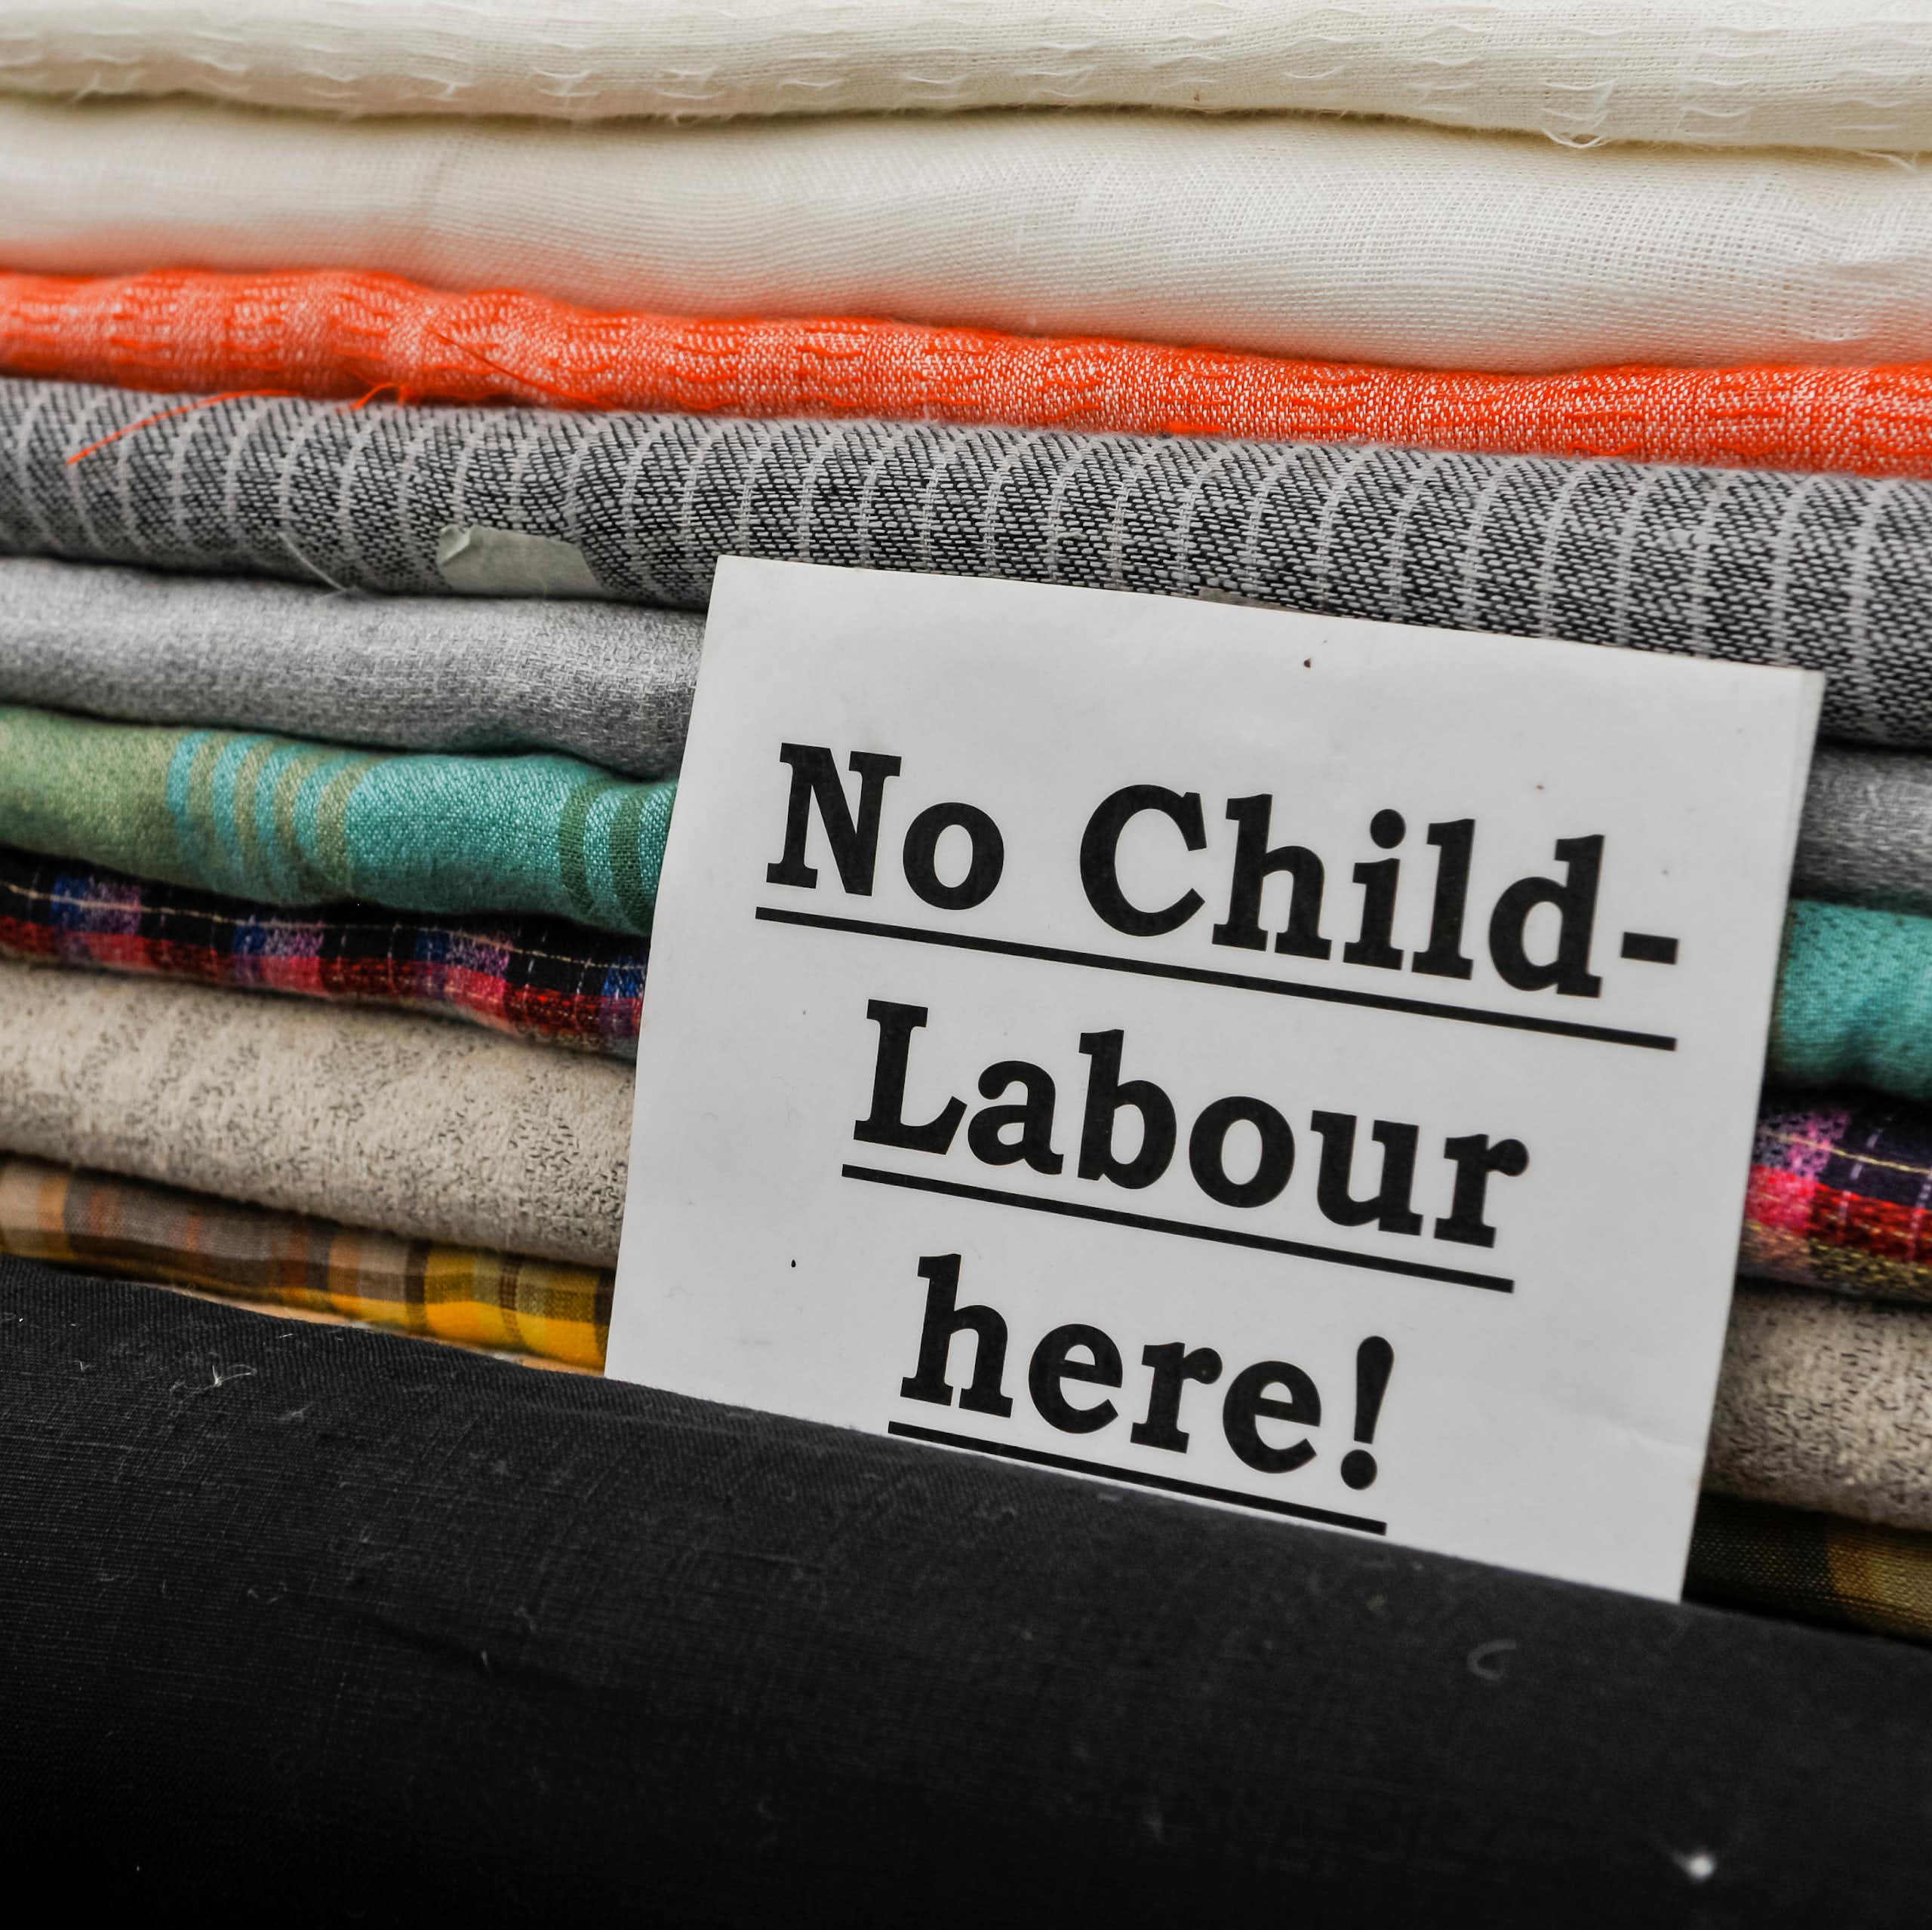 A note in front of a pile of folded fabric that says 'No Child Labour Here!'